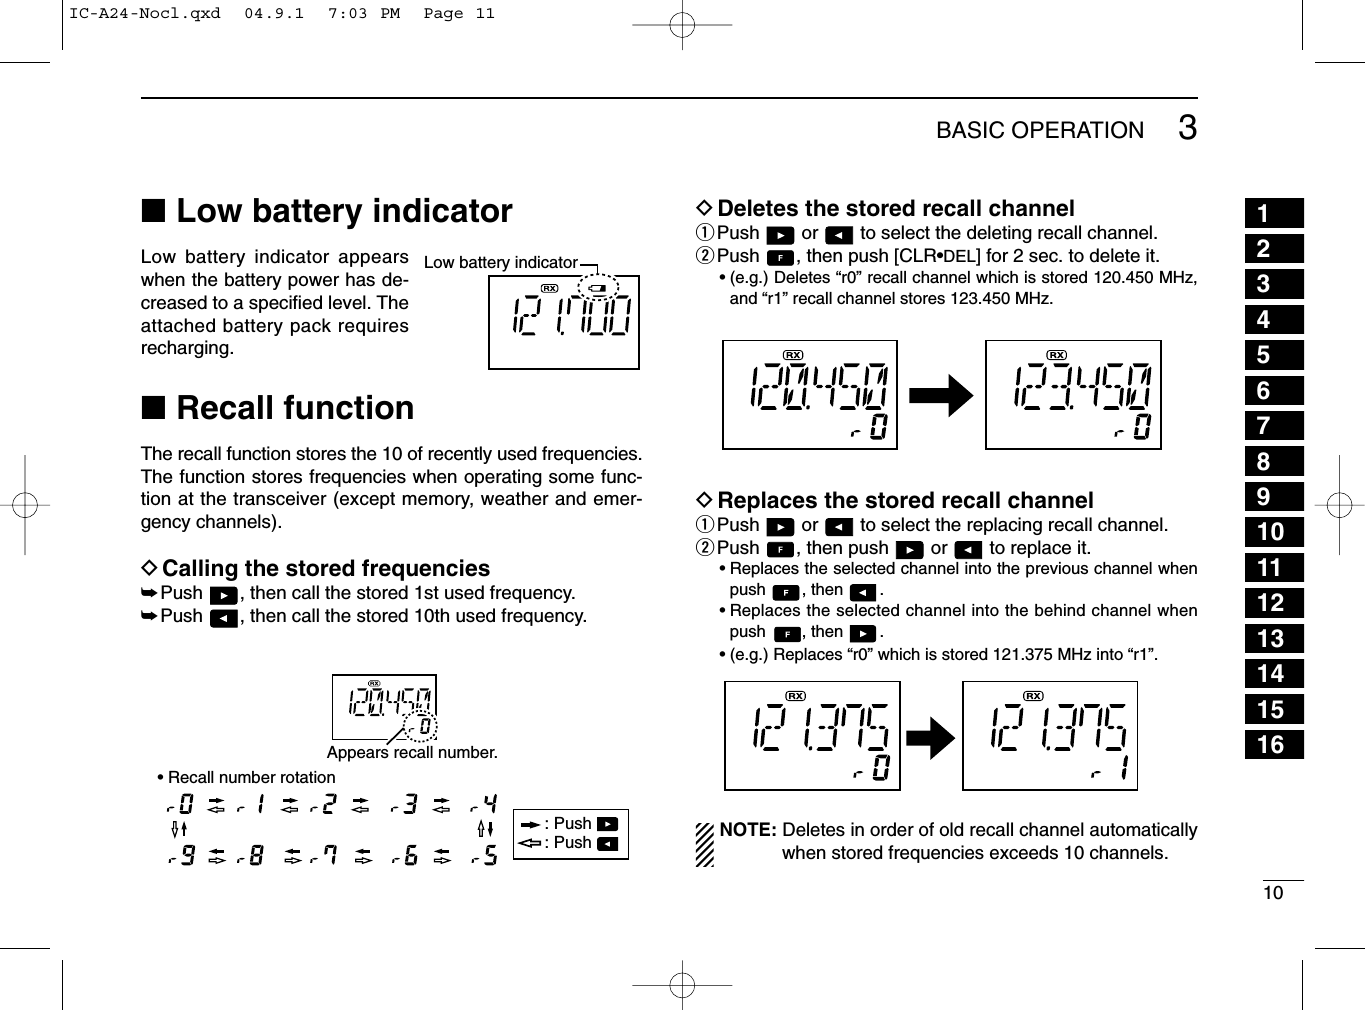 103BASIC OPERATION■Low battery indicatorLow battery indicator appearswhen the battery power has de-creased to a speciﬁed level. Theattached battery pack requiresrecharging.■Recall functionThe recall function stores the 10 of recently used frequencies.The function stores frequencies when operating some func-tion at the transceiver (except memory, weather and emer-gency channels).DCalling the stored frequencies➥Push  , then call the stored 1st used frequency.➥Push  , then call the stored 10th used frequency.DDeletes the stored recall channelqPush  or  to select the deleting recall channel.wPush  , then push [CLR•DEL] for 2 sec. to delete it.• (e.g.) Deletes “r0” recall channel which is stored 120.450 MHz,and “r1” recall channel stores 123.450 MHz.DReplaces the stored recall channelqPush  or  to select the replacing recall channel.wPush  , then push  or  to replace it.• Replaces the selected channel into the previous channel whenpush , then .• Replaces the selected channel into the behind channel whenpush , then .• (e.g.) Replaces “r0” which is stored 121.375 MHz into “r1”.NOTE: Deletes in order of old recallchannel automaticallywhen stored frequencies exceeds 10 channels.Low battery indicatorAppears recall number.: Push : Push • Recall number rotation12345678910111213141516IC-A24-Nocl.qxd  04.9.1  7:03 PM  Page 11